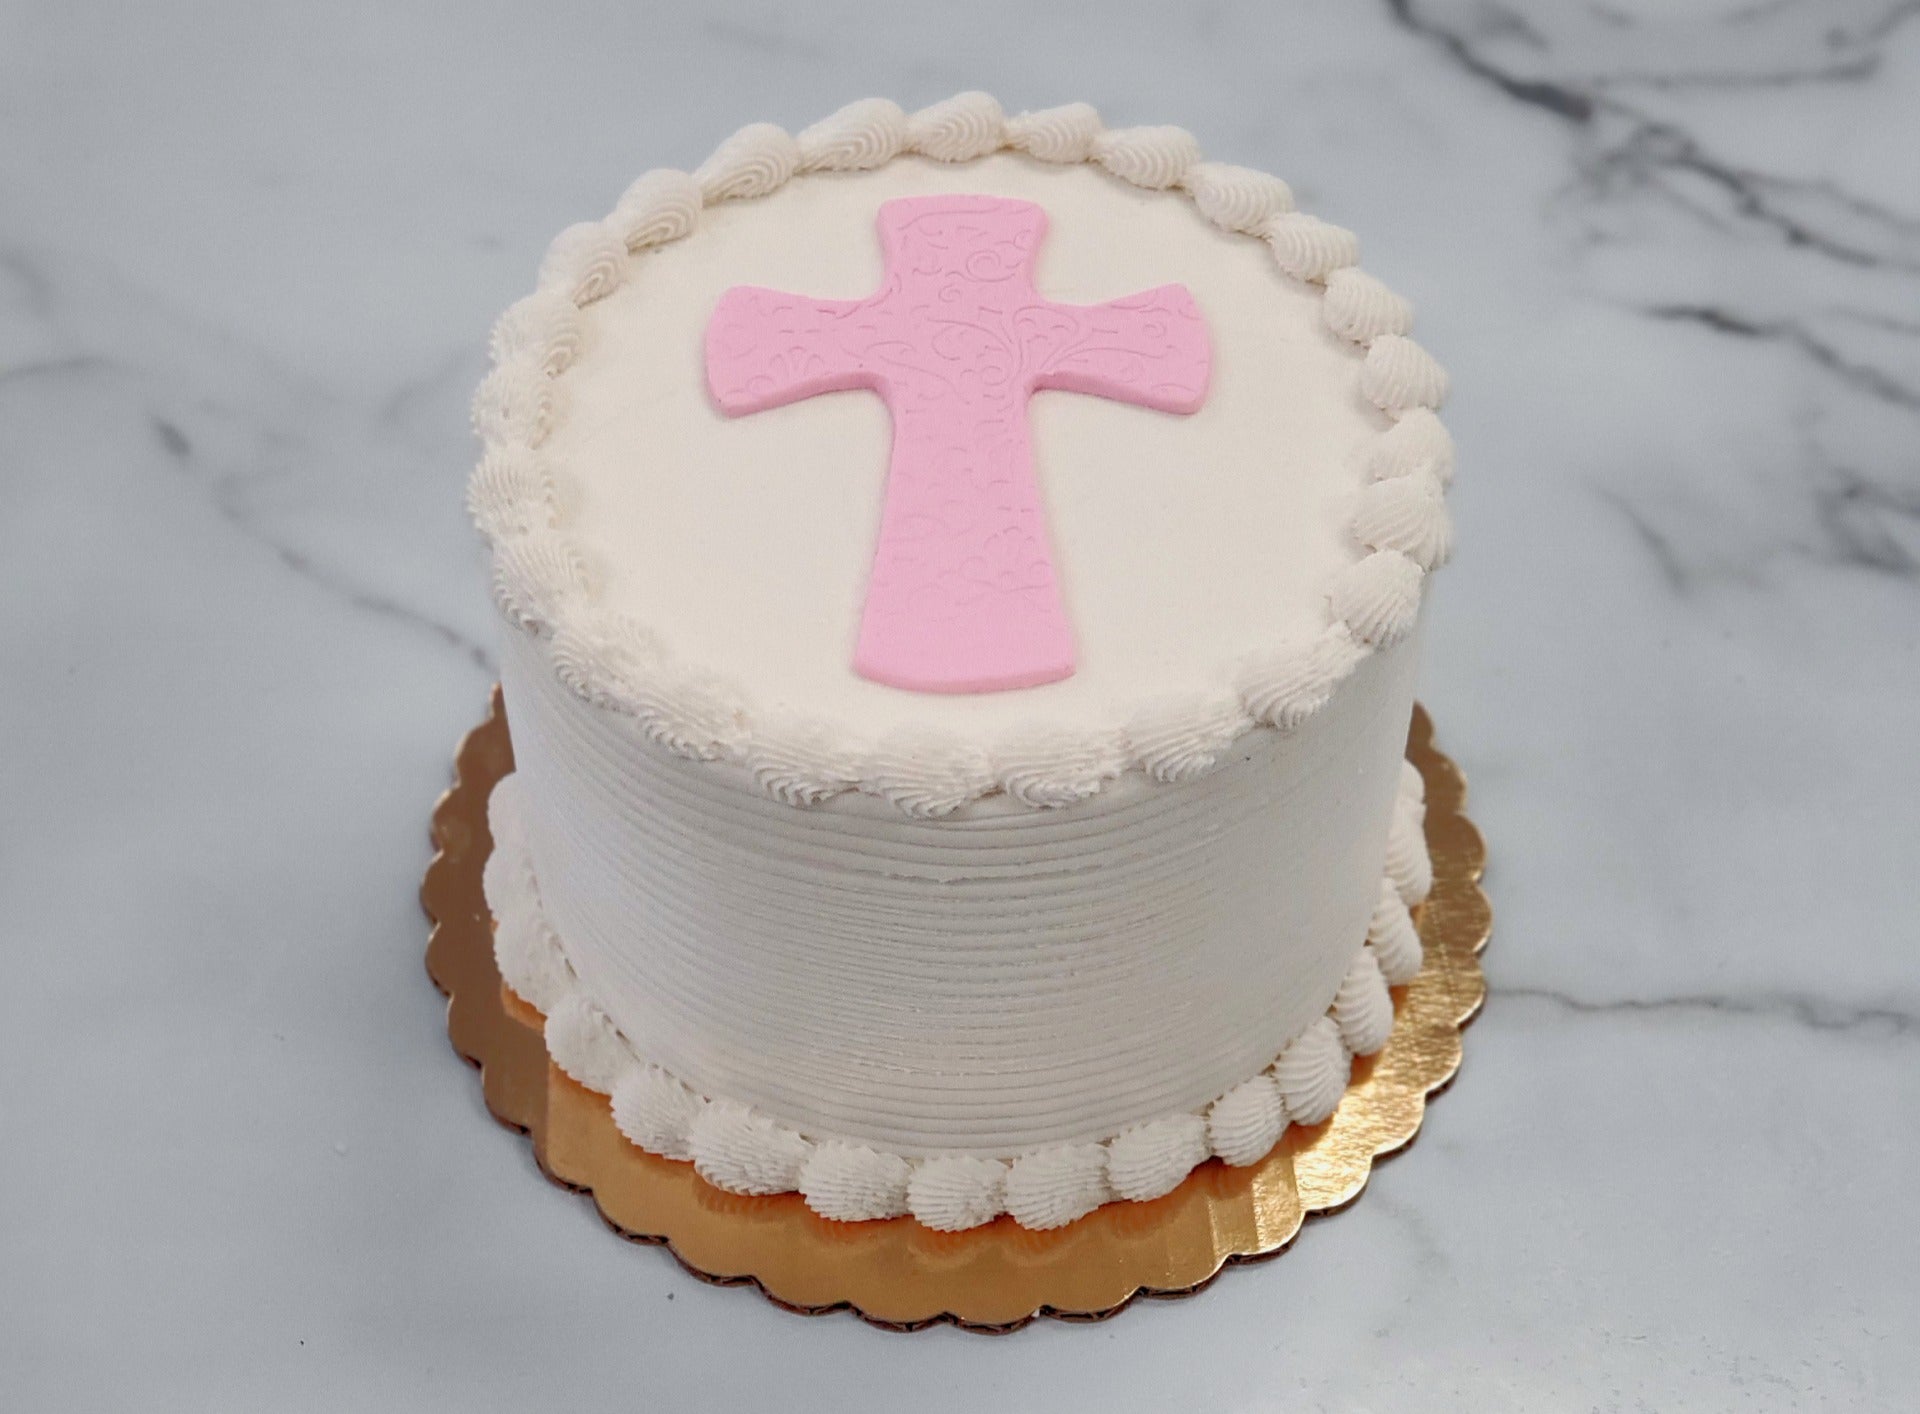 Buy Large Upright Standing Cross. Christening / Baptism Cross Cake Topper  Decoration. Holy Communion Cake Decoration. YELLOW Online in India - Etsy